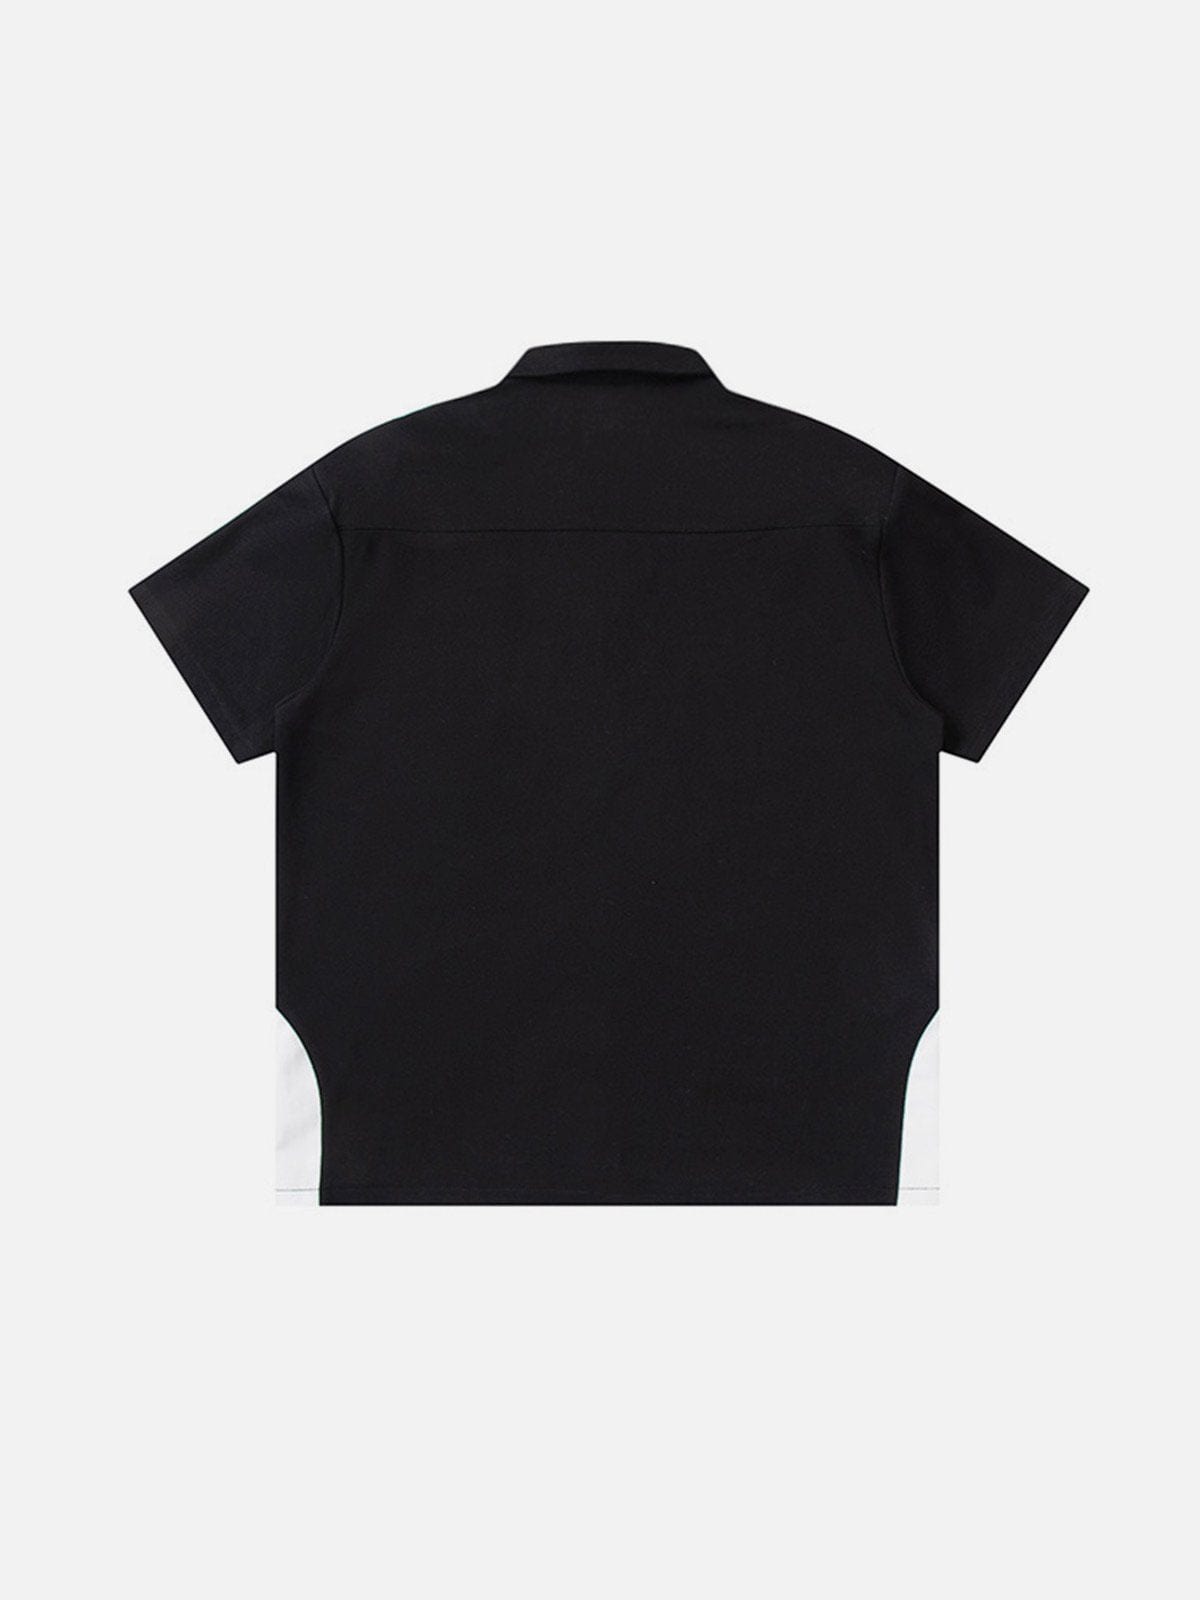 NEV Faux Leather Material Splicing Tee